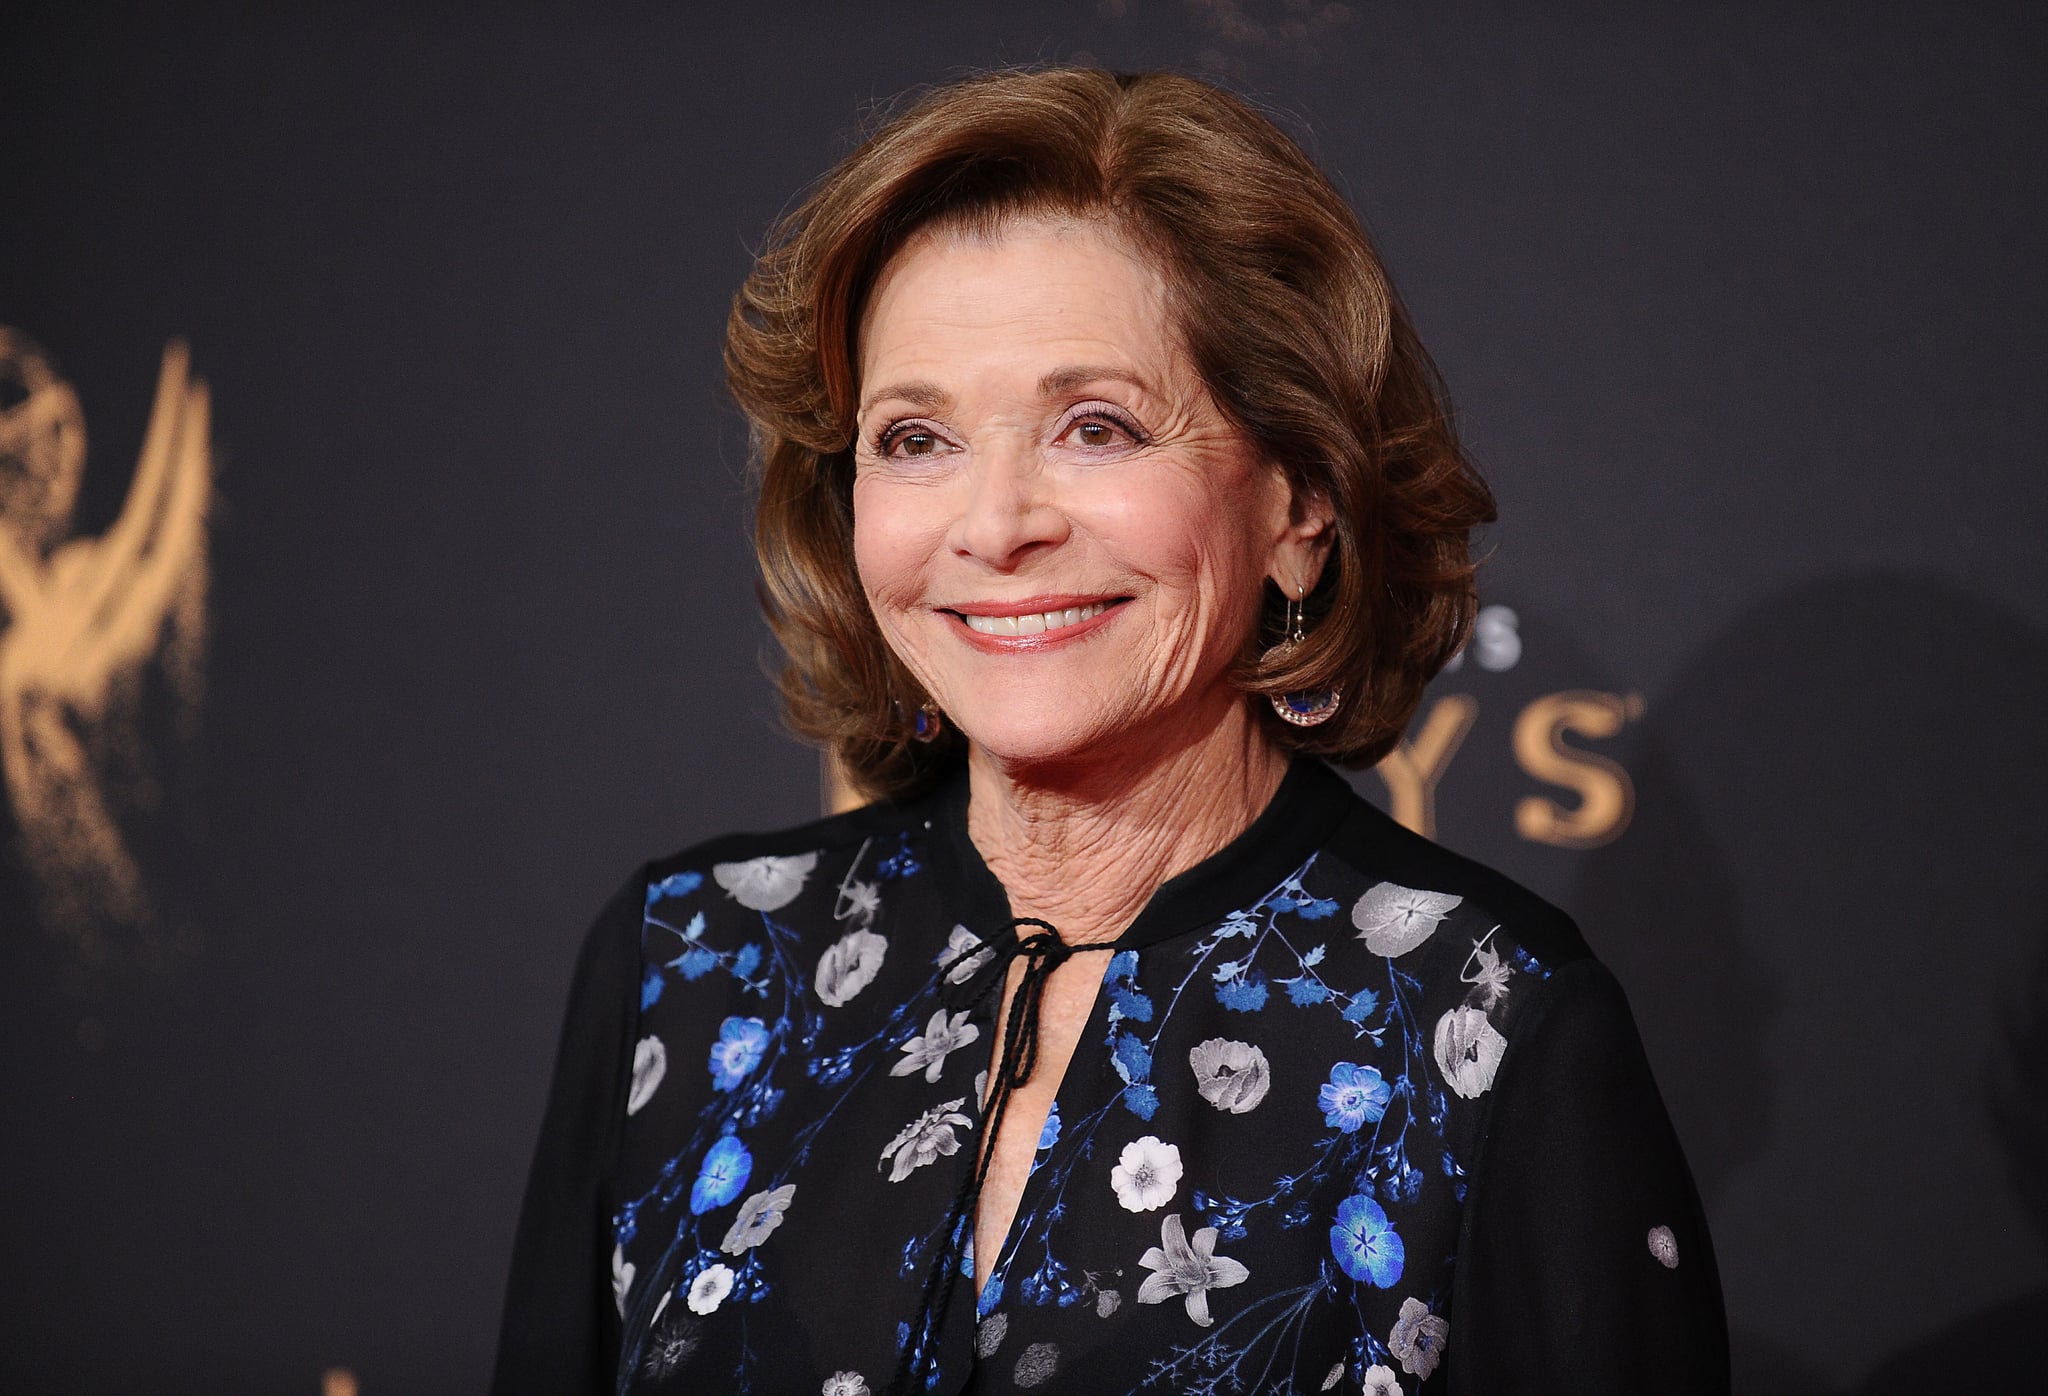 LOS ANGELES, CA - SEPTEMBER 09: Actress Jessica Walter attends the 2017 Creative Arts Emmy Awards at Microsoft Theater on September 9, 2017 in Los Angeles, California.  (Photo by Jason LaVeris/FilmMagic)